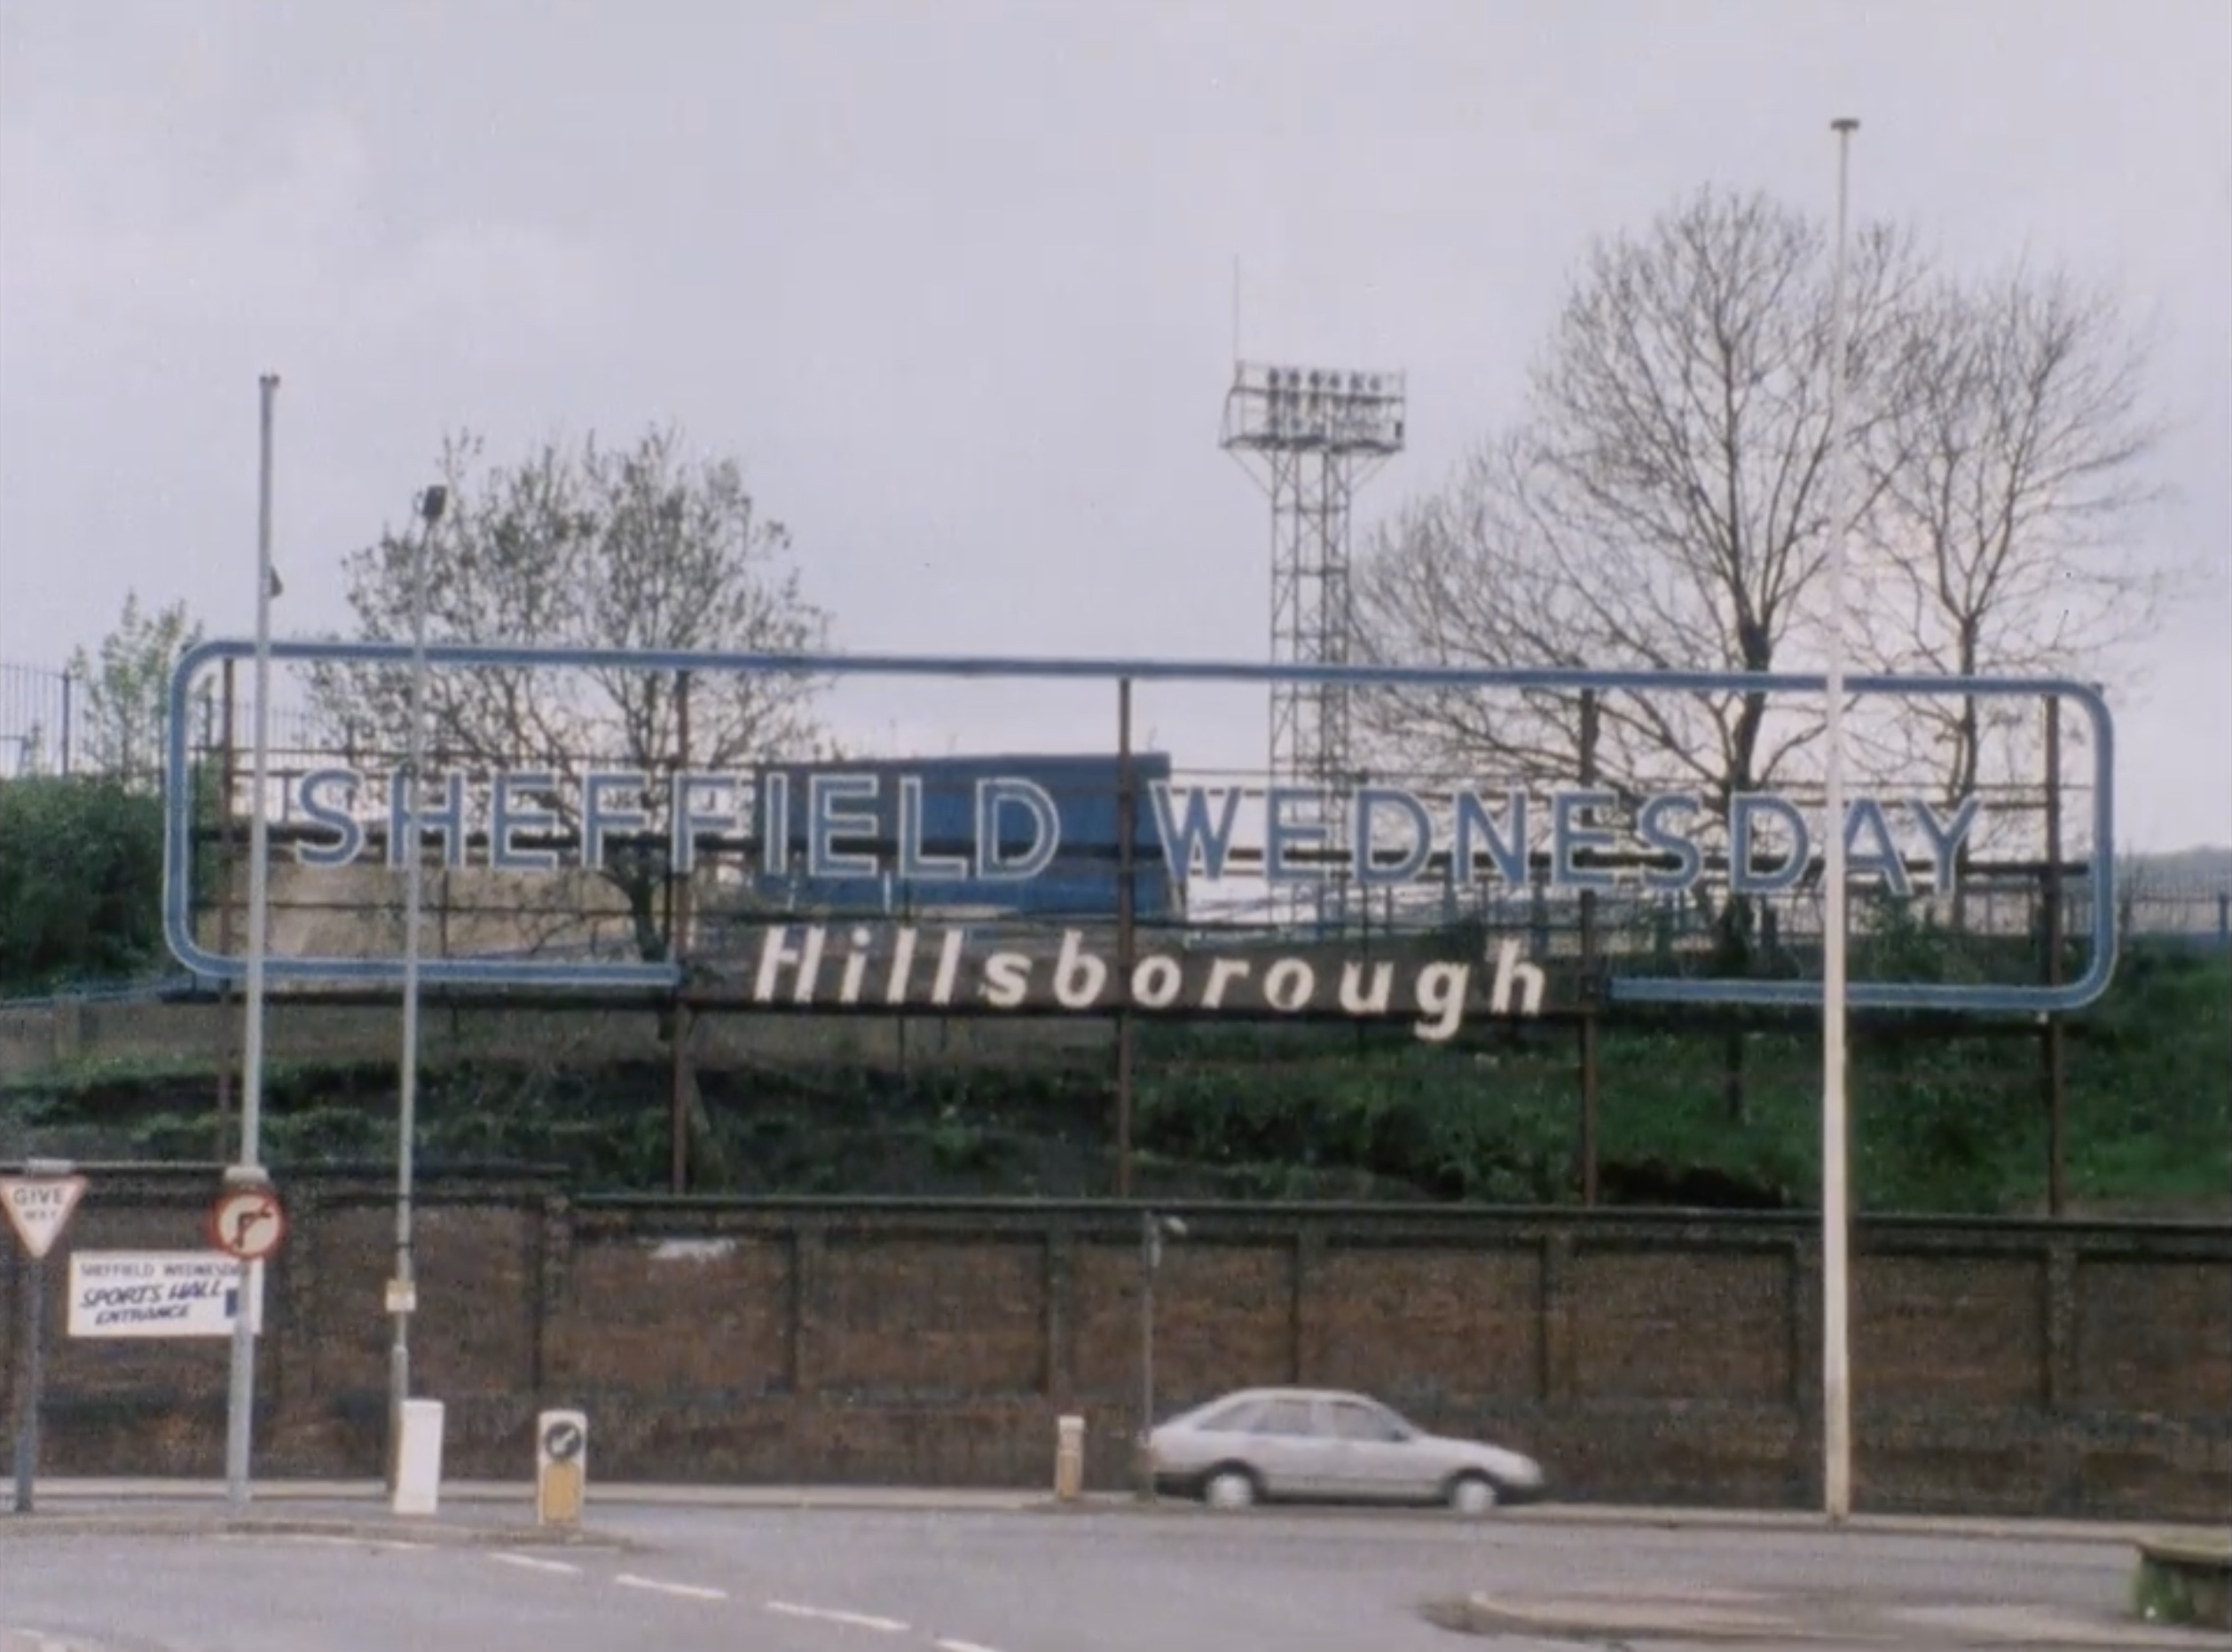 The old Sheffield Wednesday Sign on Penistone Road